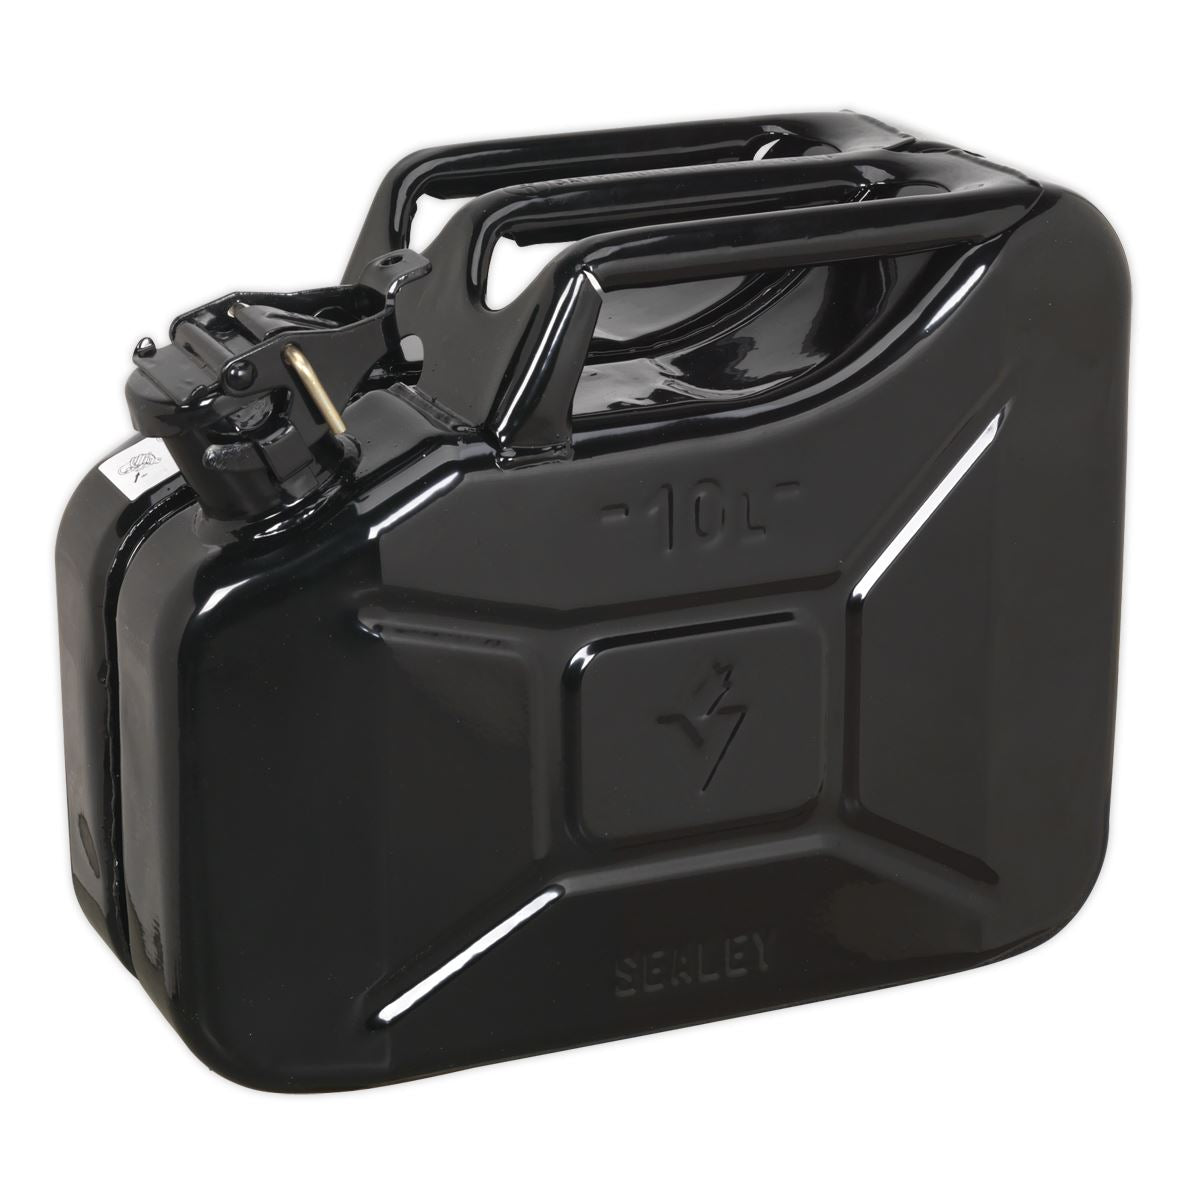 Sealey Jerry Can 10L - Black